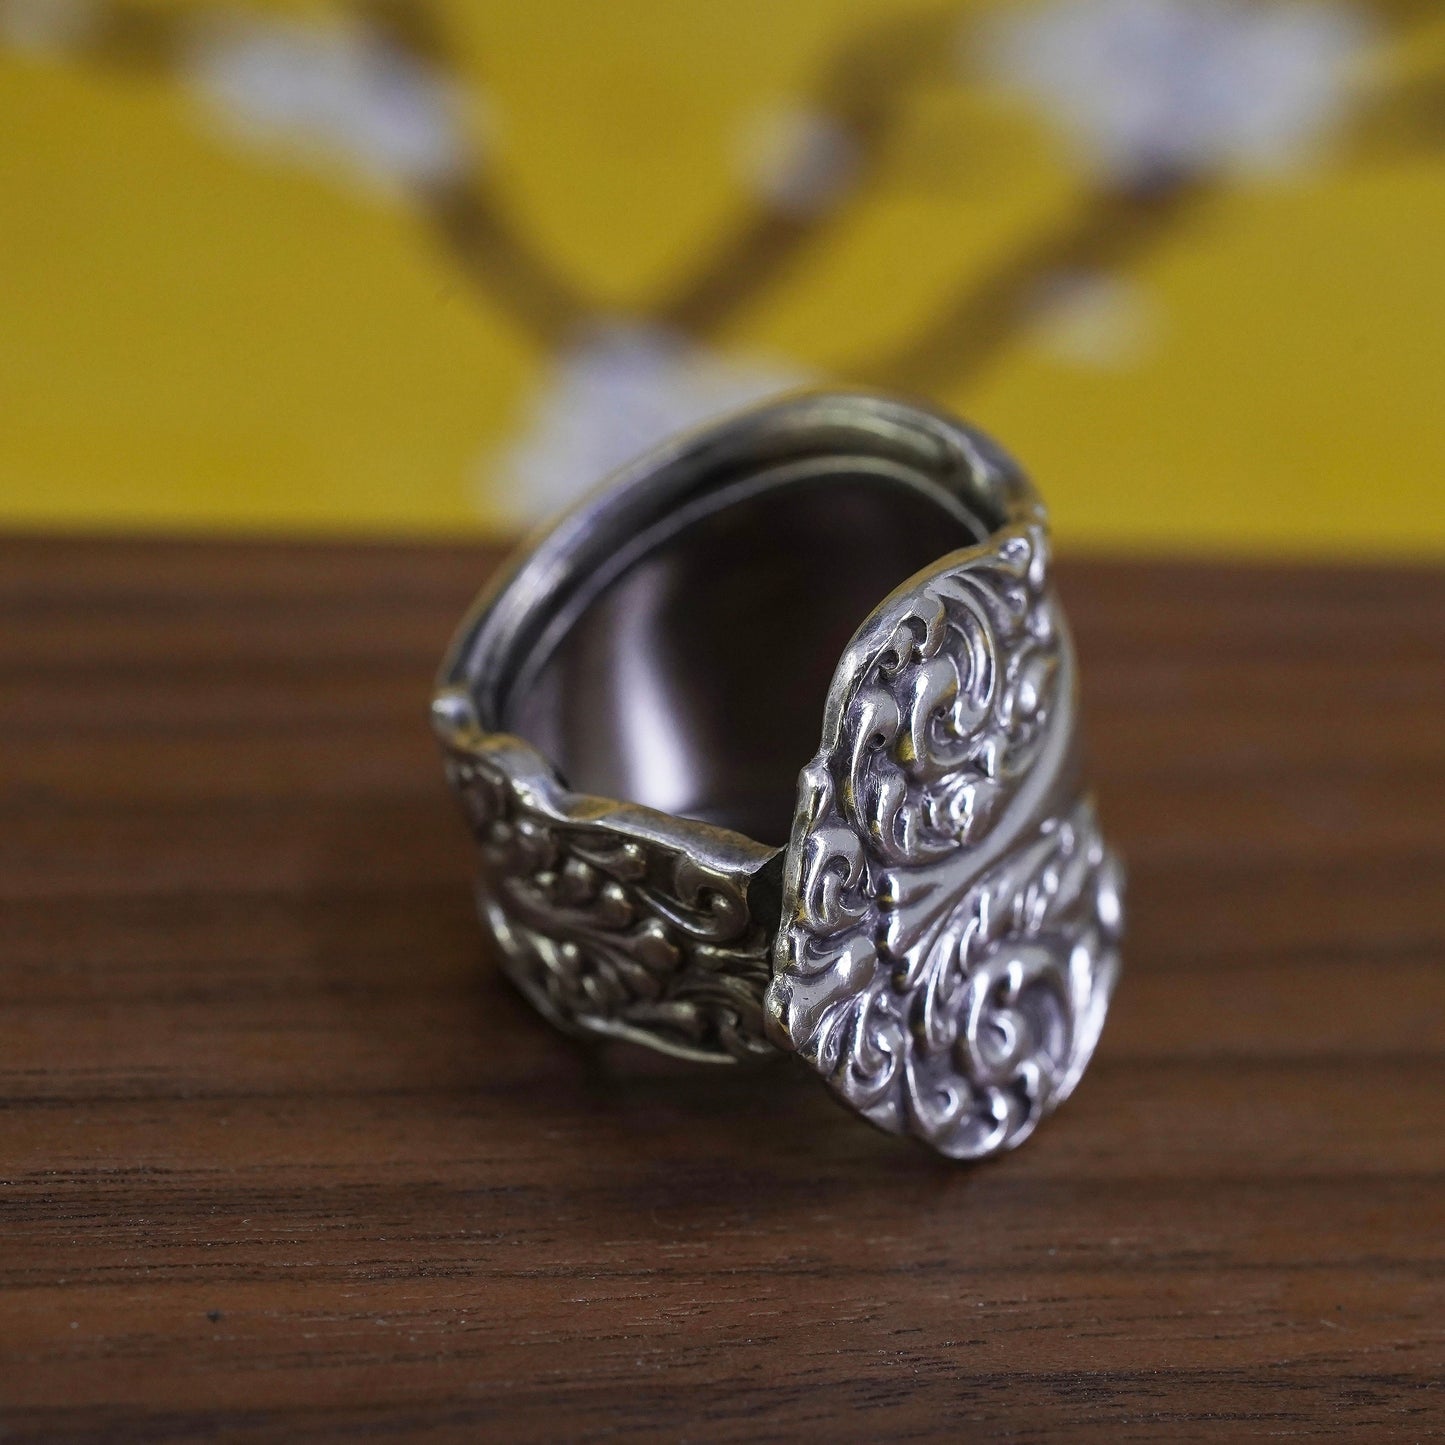 Size 7, vintage silver tone handmade spoon ring